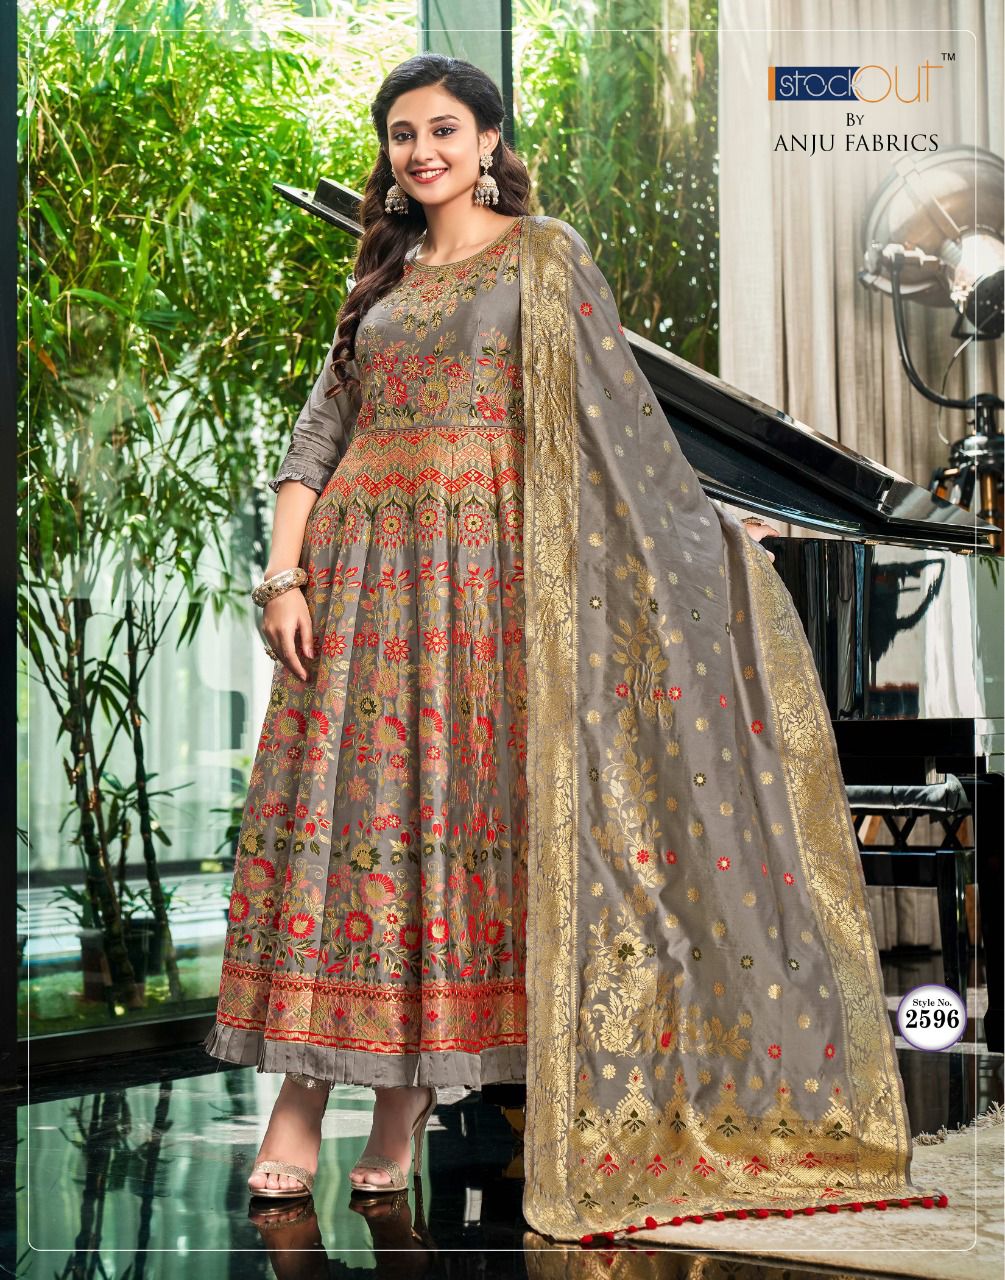 Party Wear Suits - Buy Party Wear Suit Online at DiwaliStyle